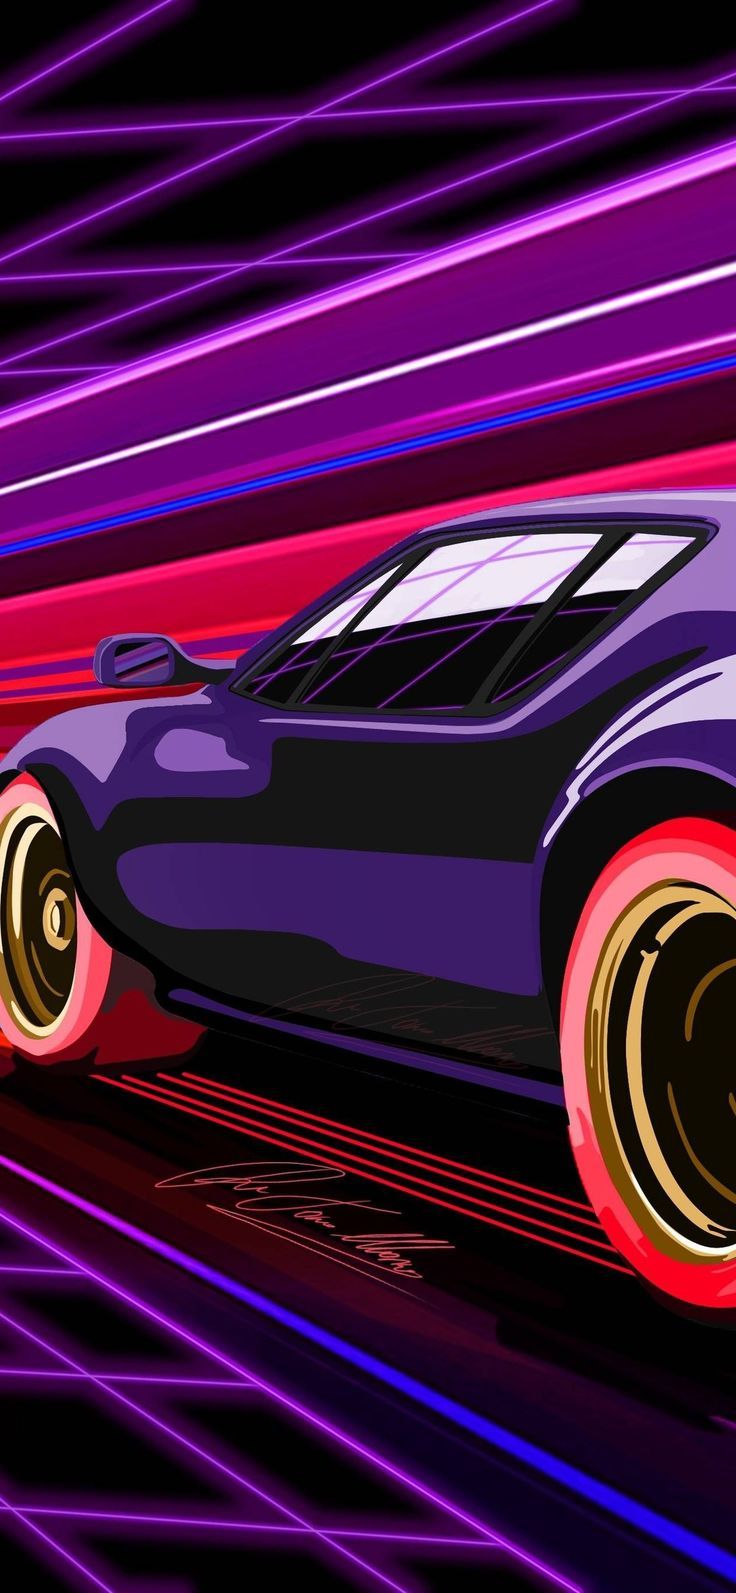 iPhone XS wallpaper, Retro Racing Muscle Car iPhone X Magazine daily source of best wallpaper around the world